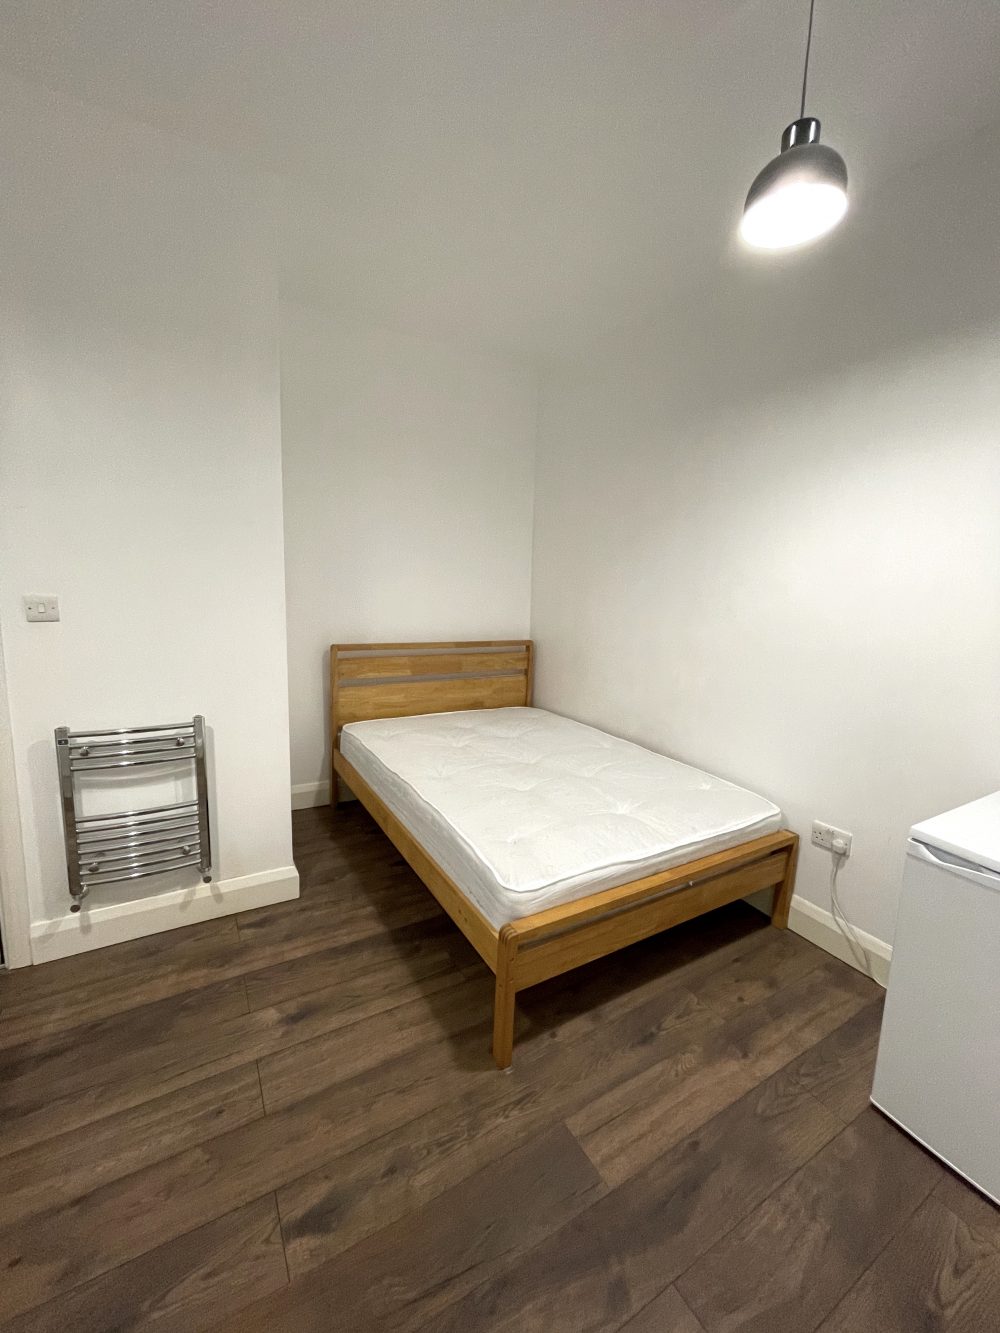 Studio Available to rent in E3 Hackney Wick Wick Lane Pic13